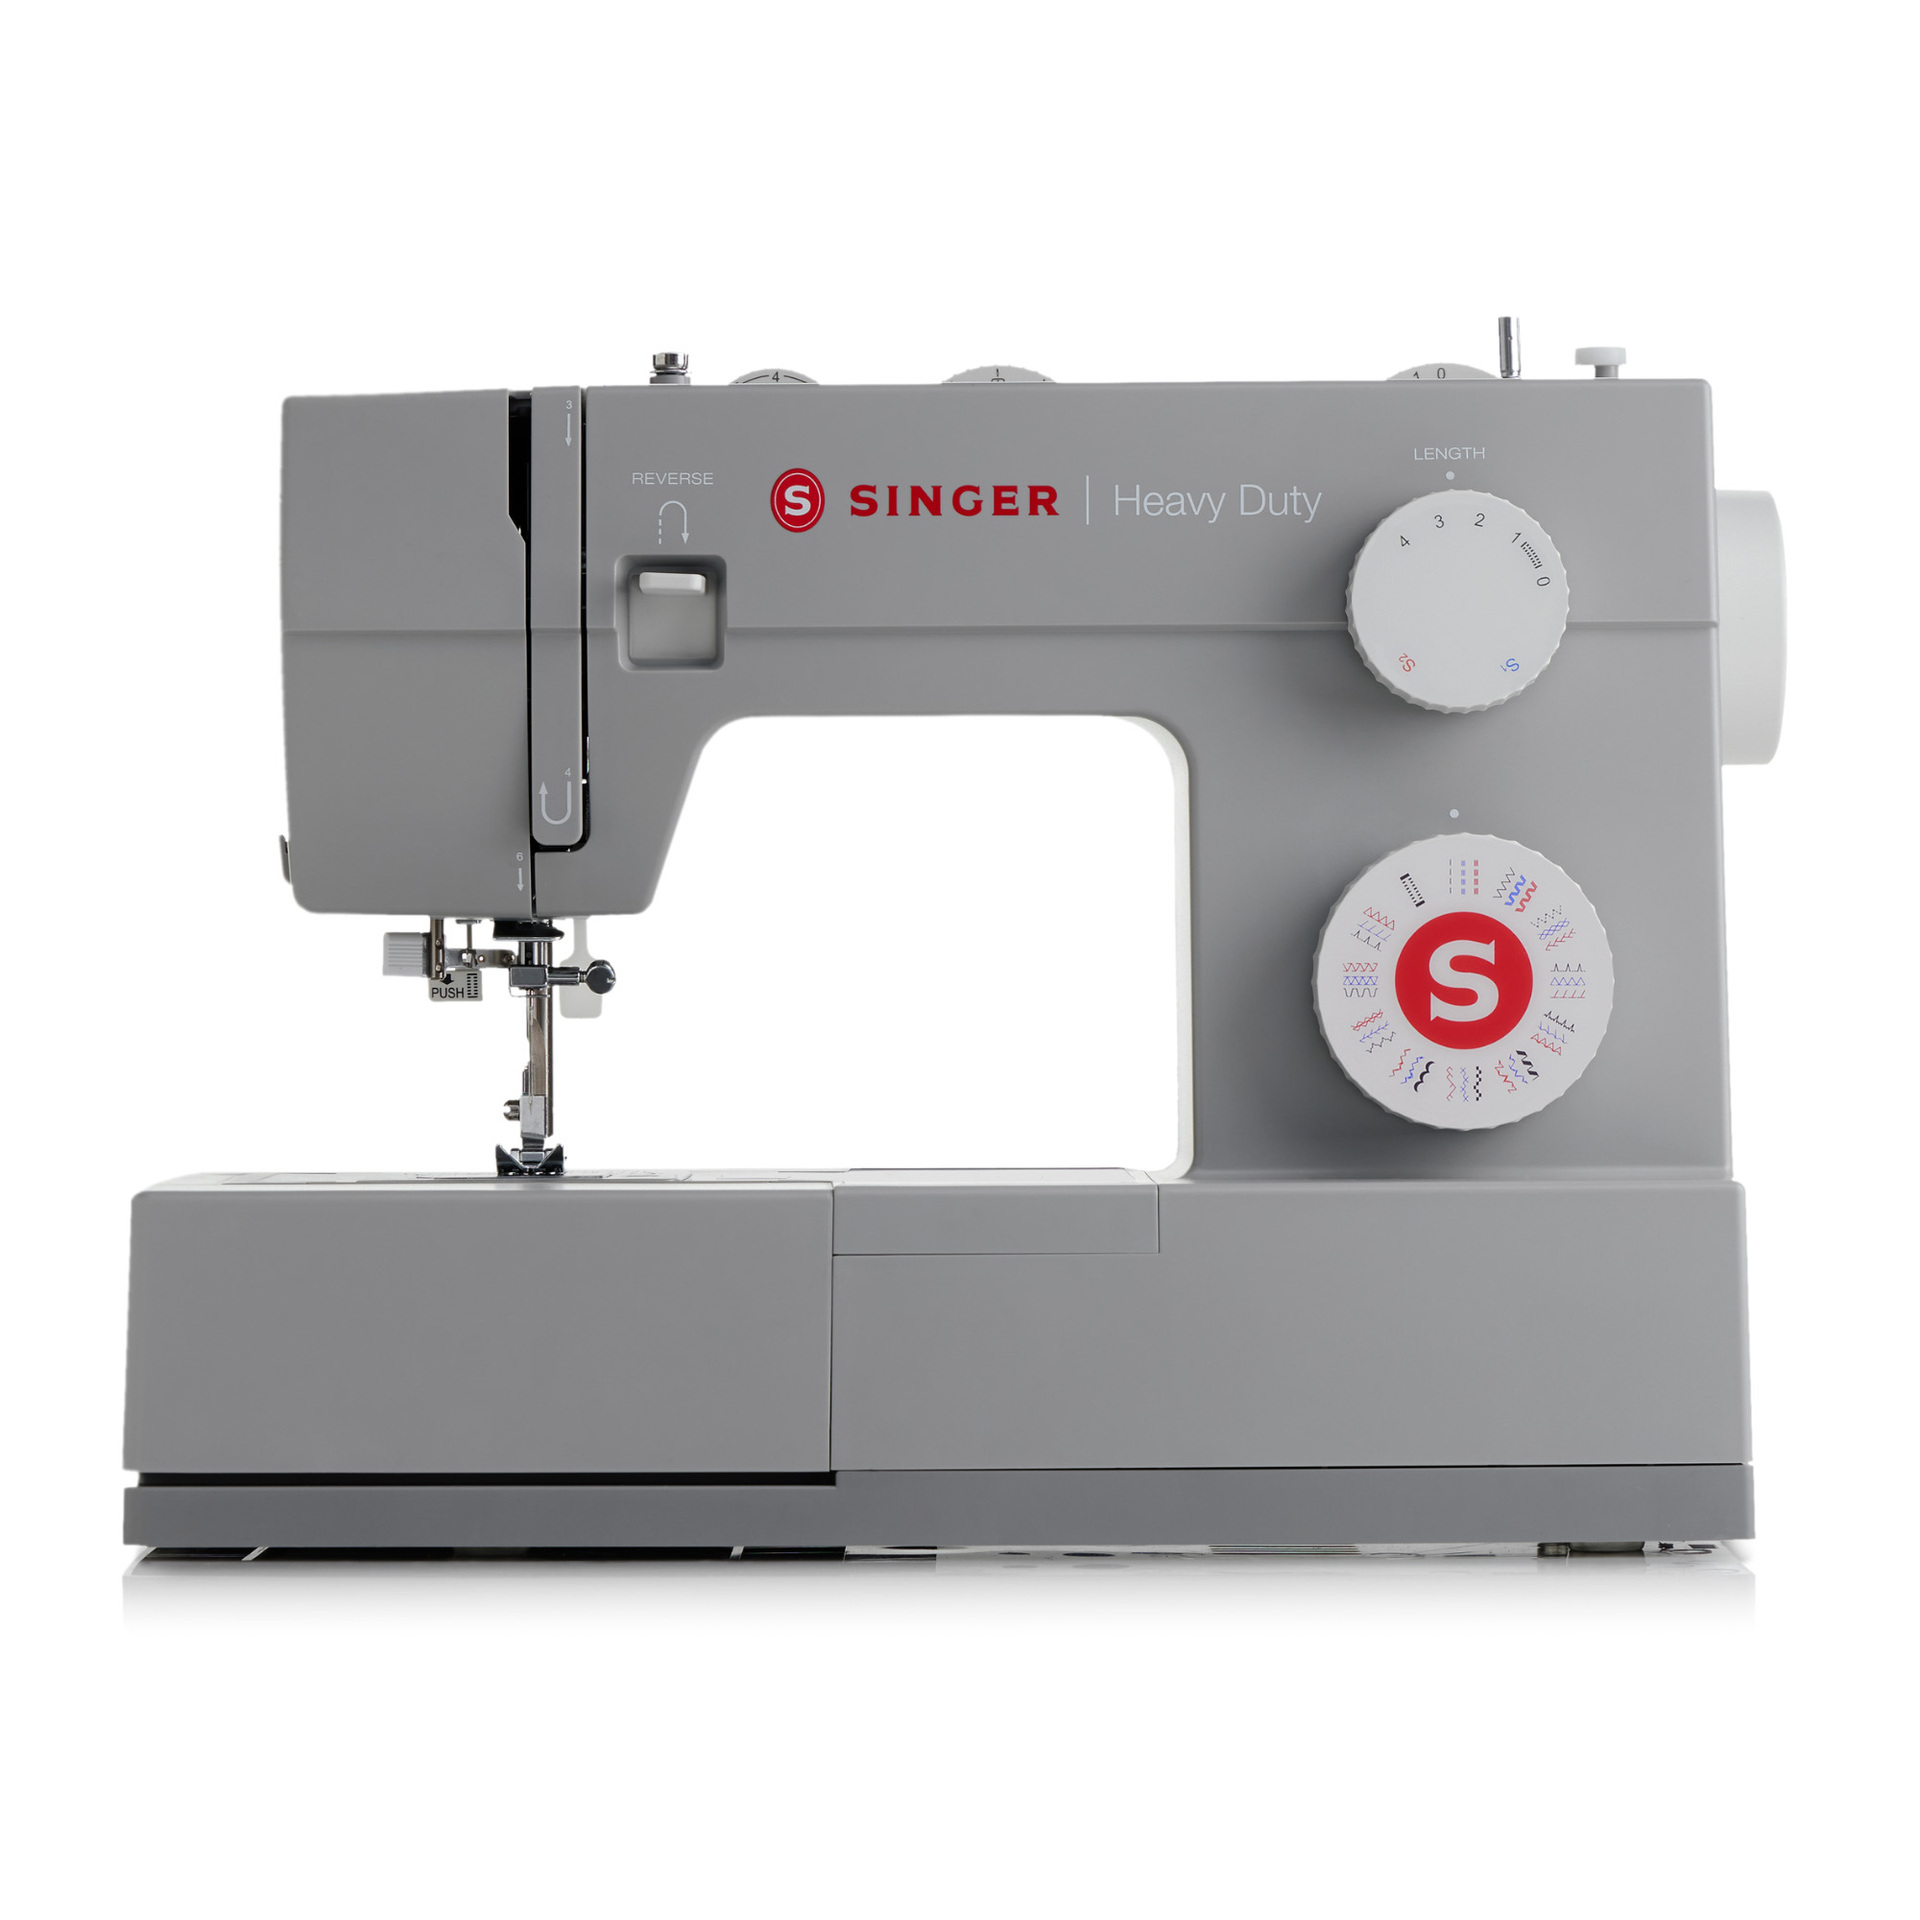 Michaels] Singer 4452 heavy duty sewing machine. $195 after promo